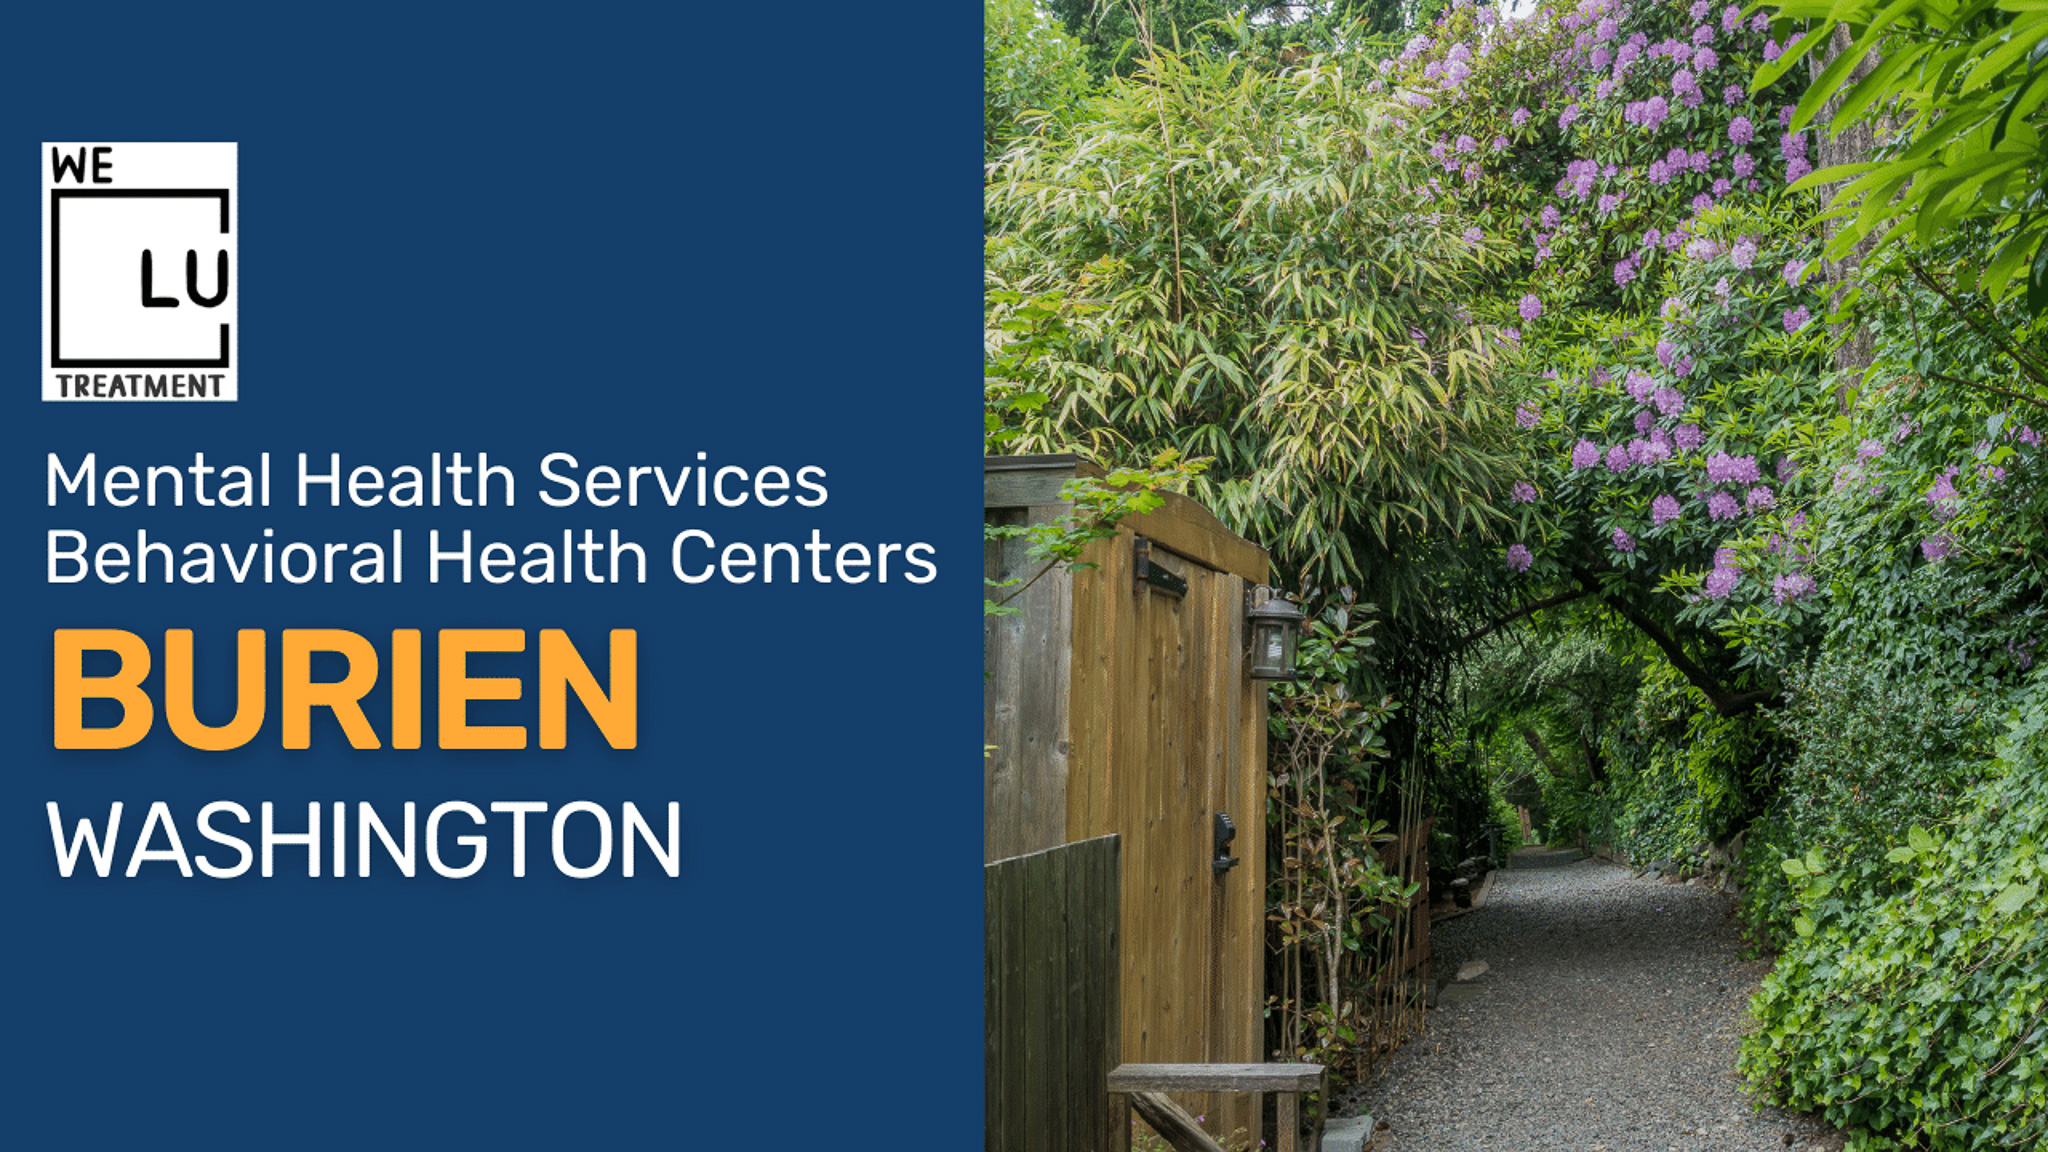 Burien WA We Level Up treatment center for drug and alcohol rehab detox and mental health services - Image 1